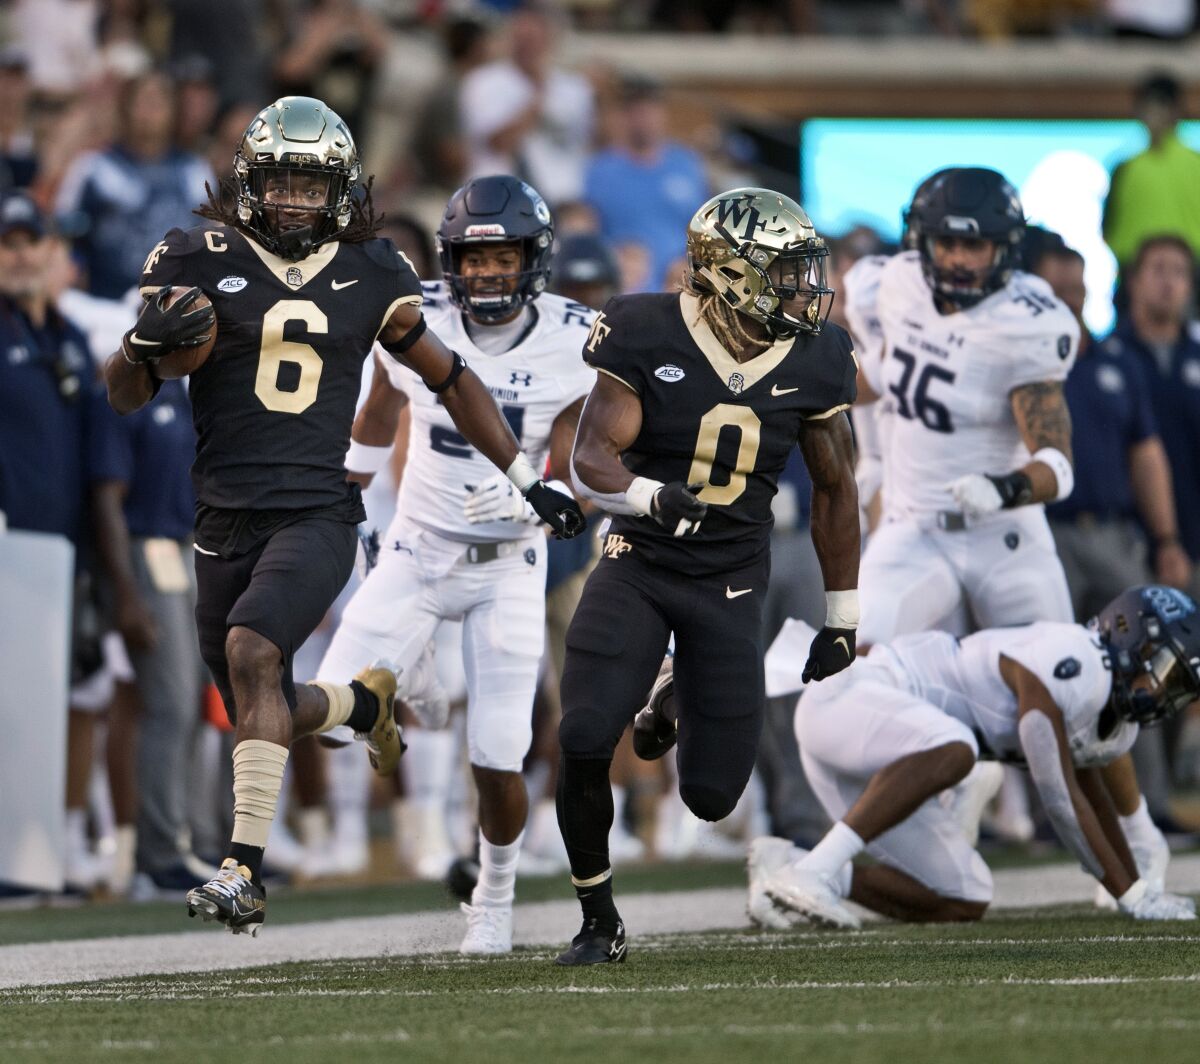 Wake Forest's Ja'Sir Taylor (6) takes a kickoff return in for a first-half touchdown against Old Dominion during an NCAA college football game Friday, Sept. 3, 2021, in Winston-Salem, N.C. (Walt Unks/The Winston-Salem Journal via AP)